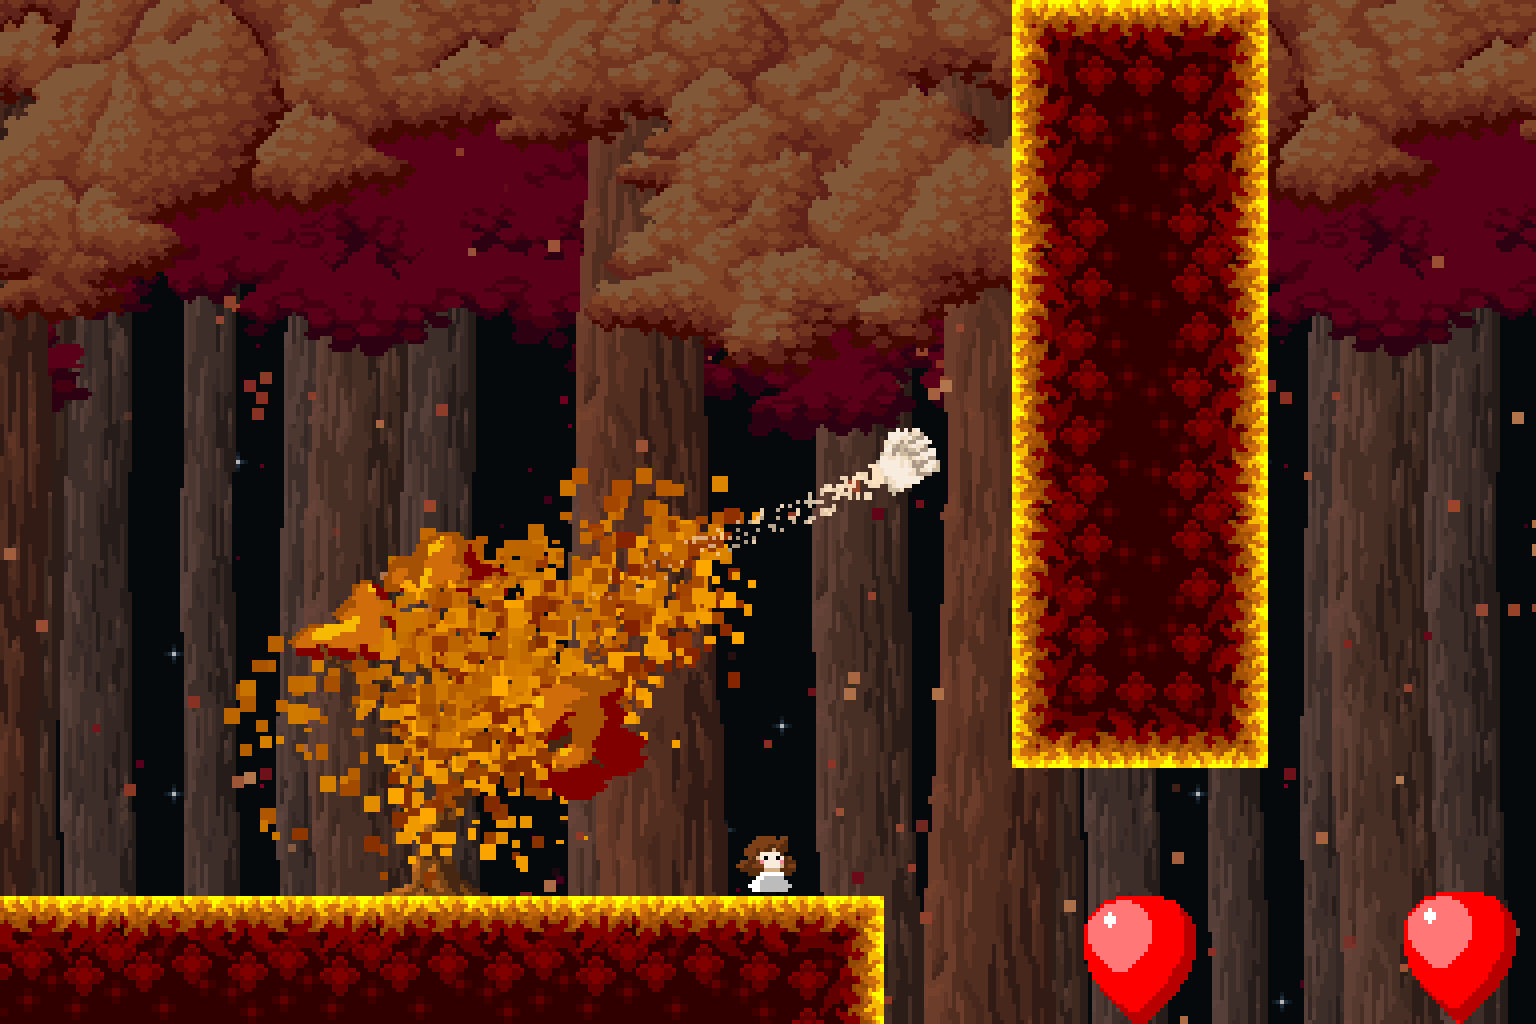 screenshot: Vivi is standing in a forest. A tree is being punched and leaves are falling off.